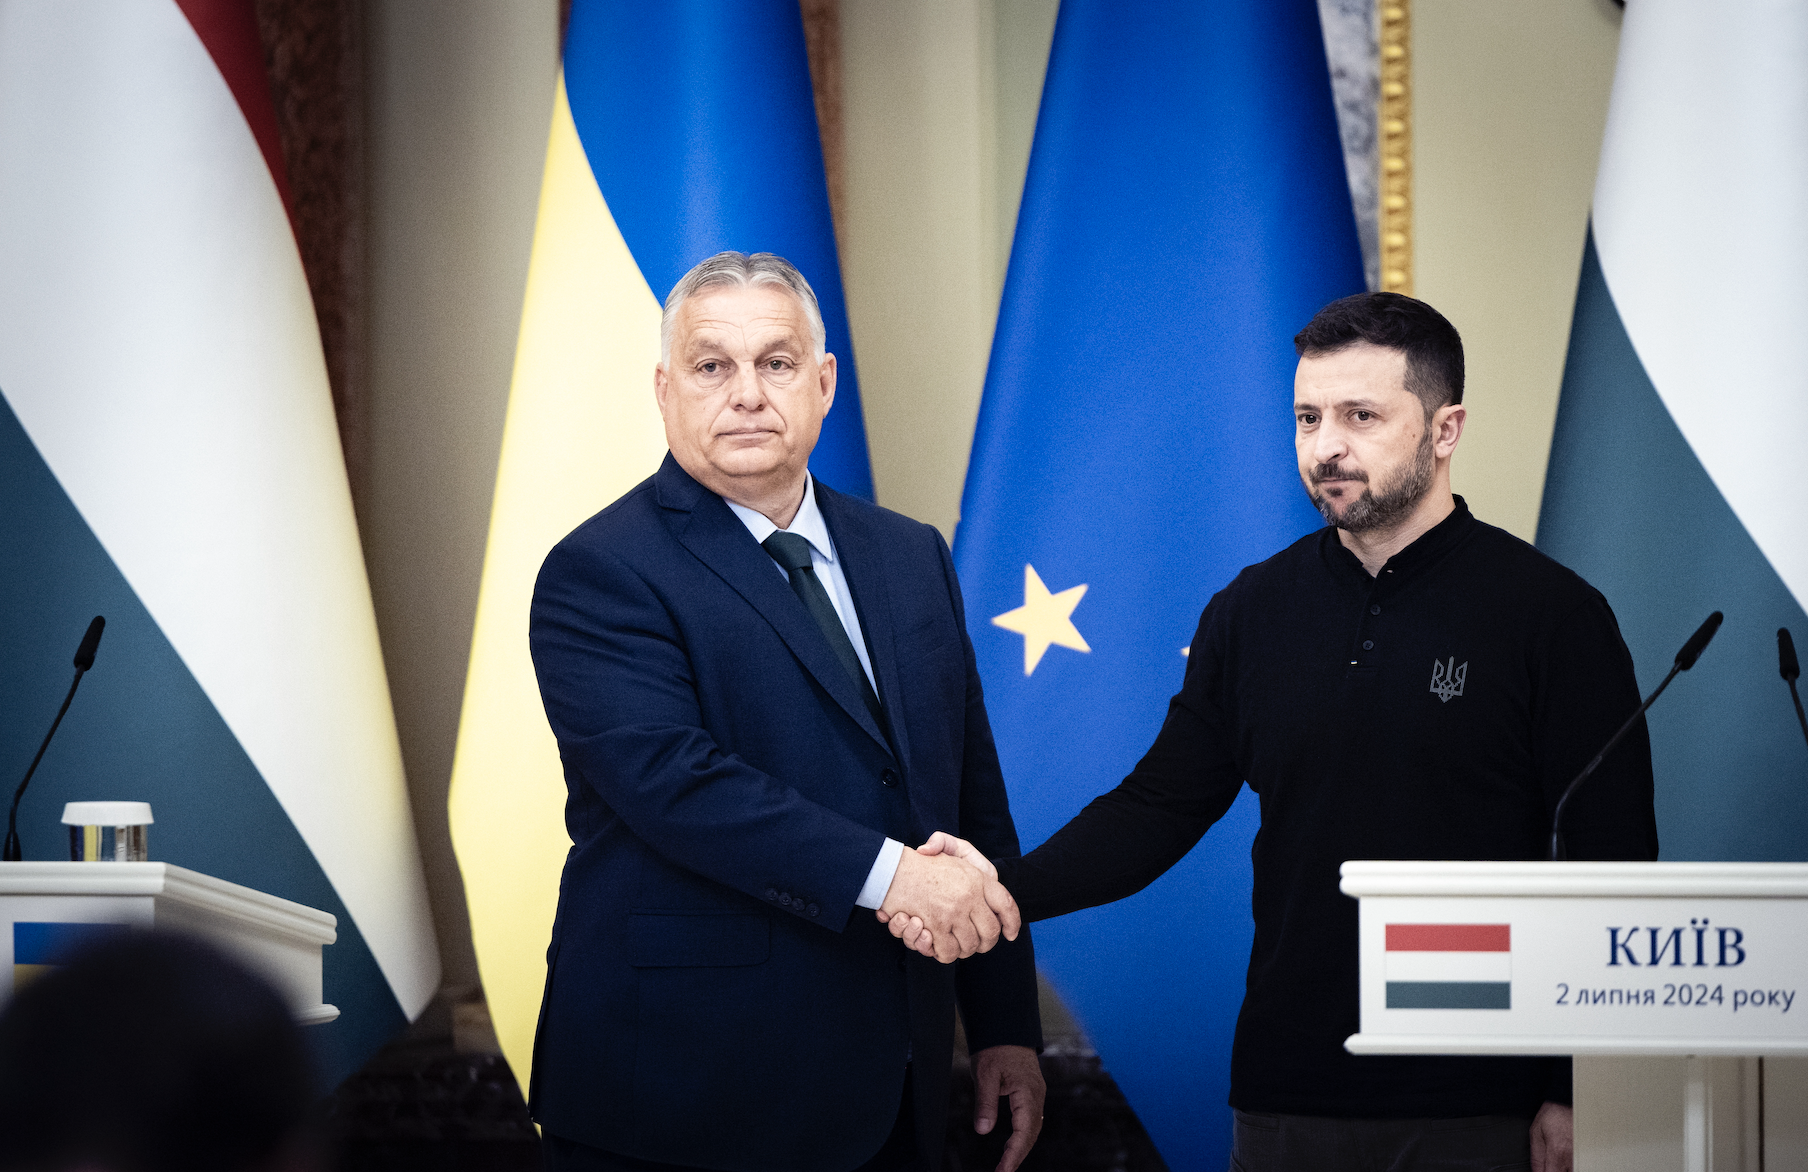 Orbán Asks Zelensky to Weigh Ceasefire With a Deadline